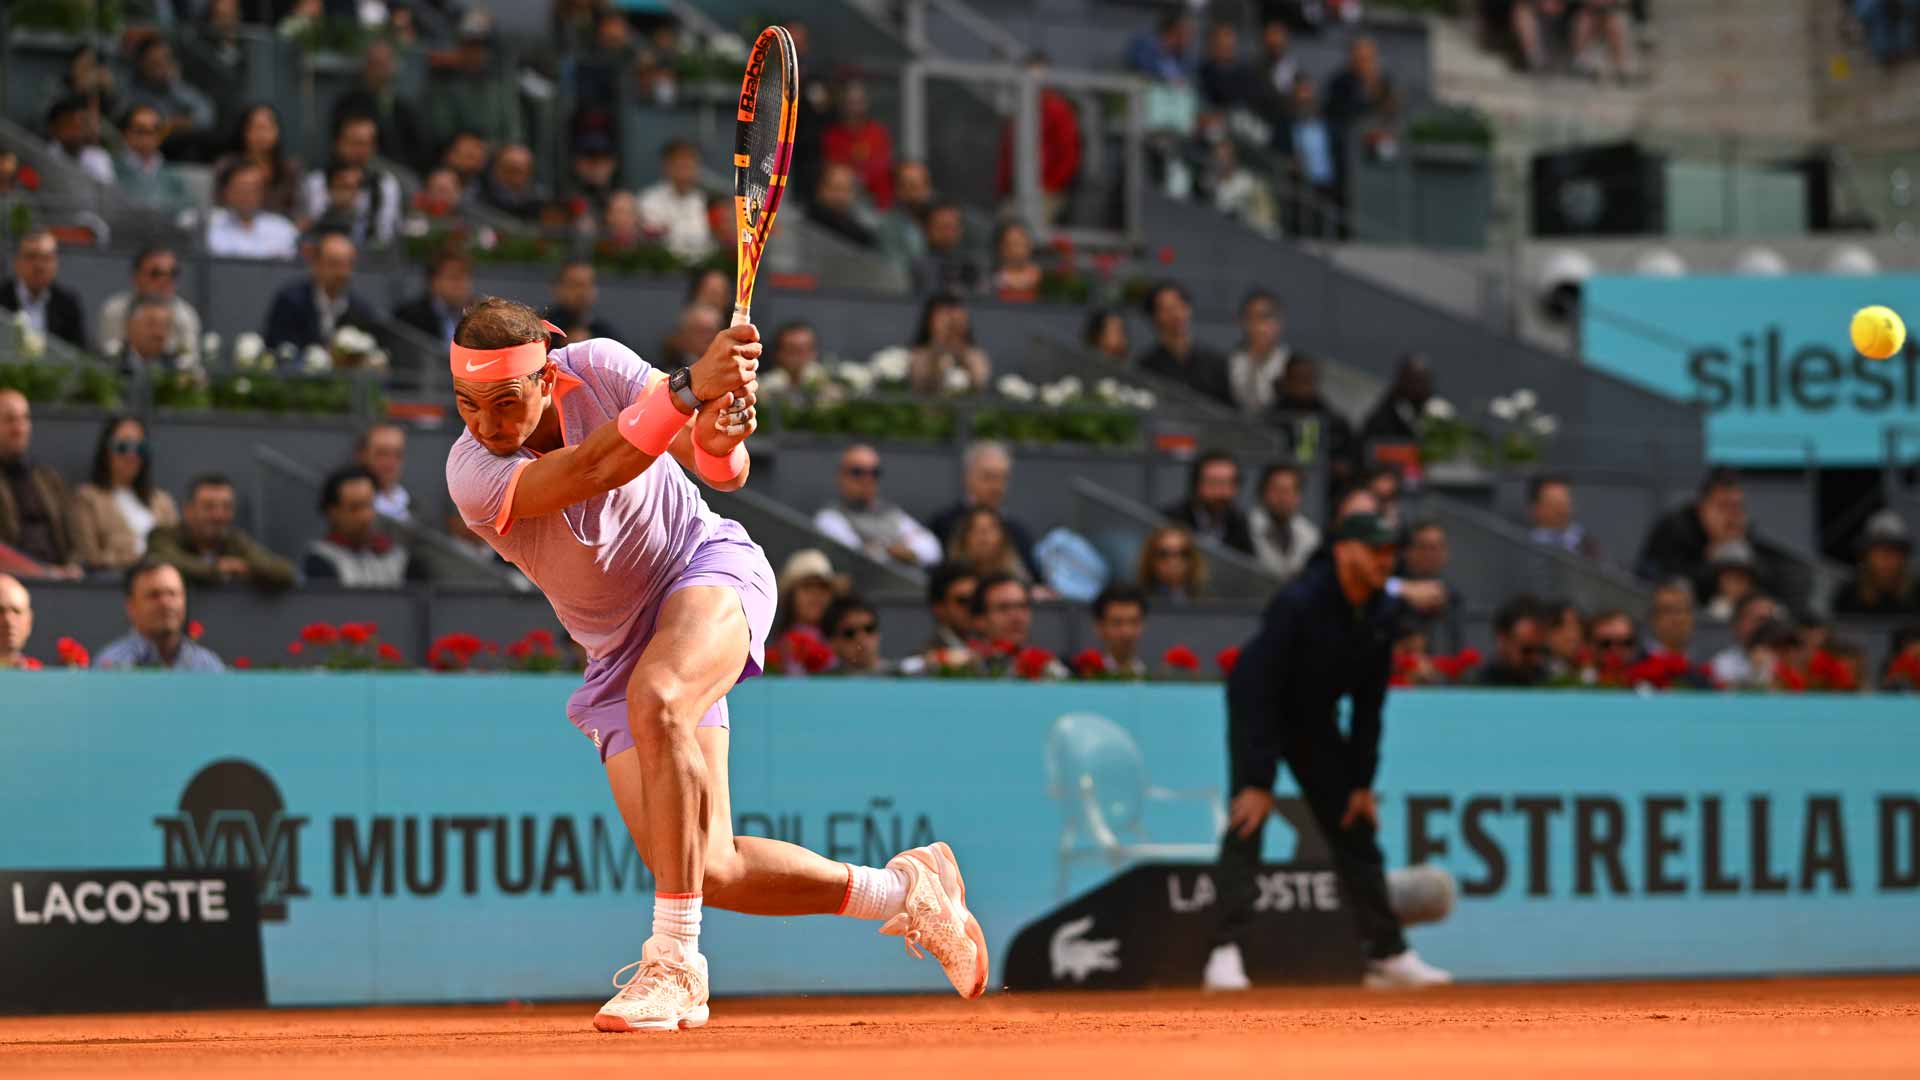 Five-time champion Rafael Nadal is making his 20th appearance at the Mutua Madrid Open.